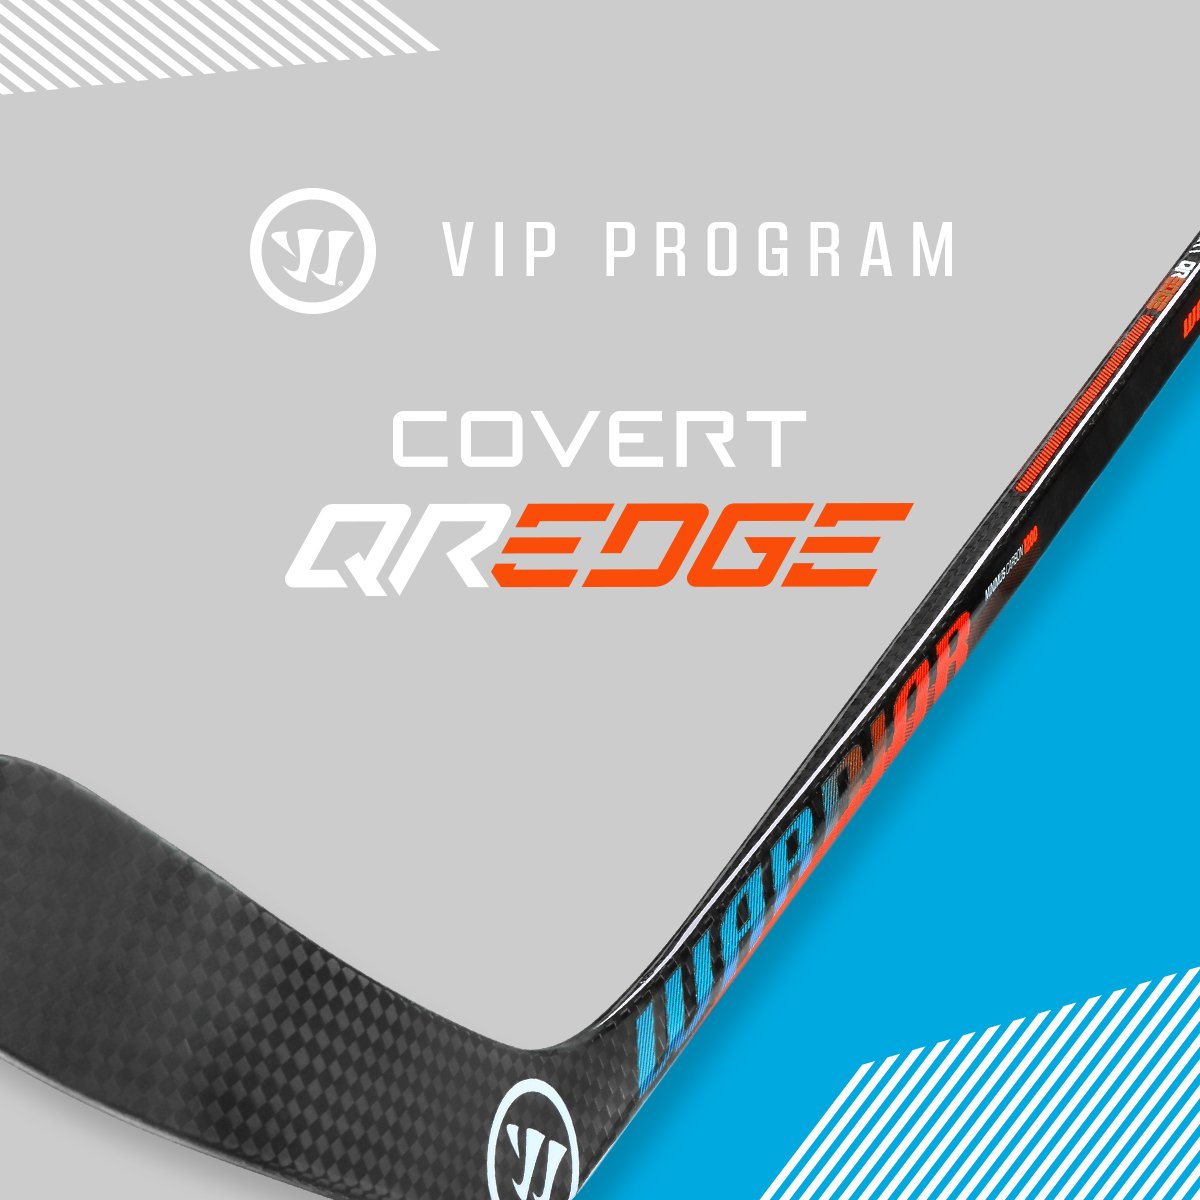 Finally had the chance to give the new @WarriorHockey #CovertQREdge a try tonight. Lightest stick I've used and incredible load/accuracy with 3 shots finding the twine in a tough 4-3 loss. #GainTheEdge #WarriorVIP